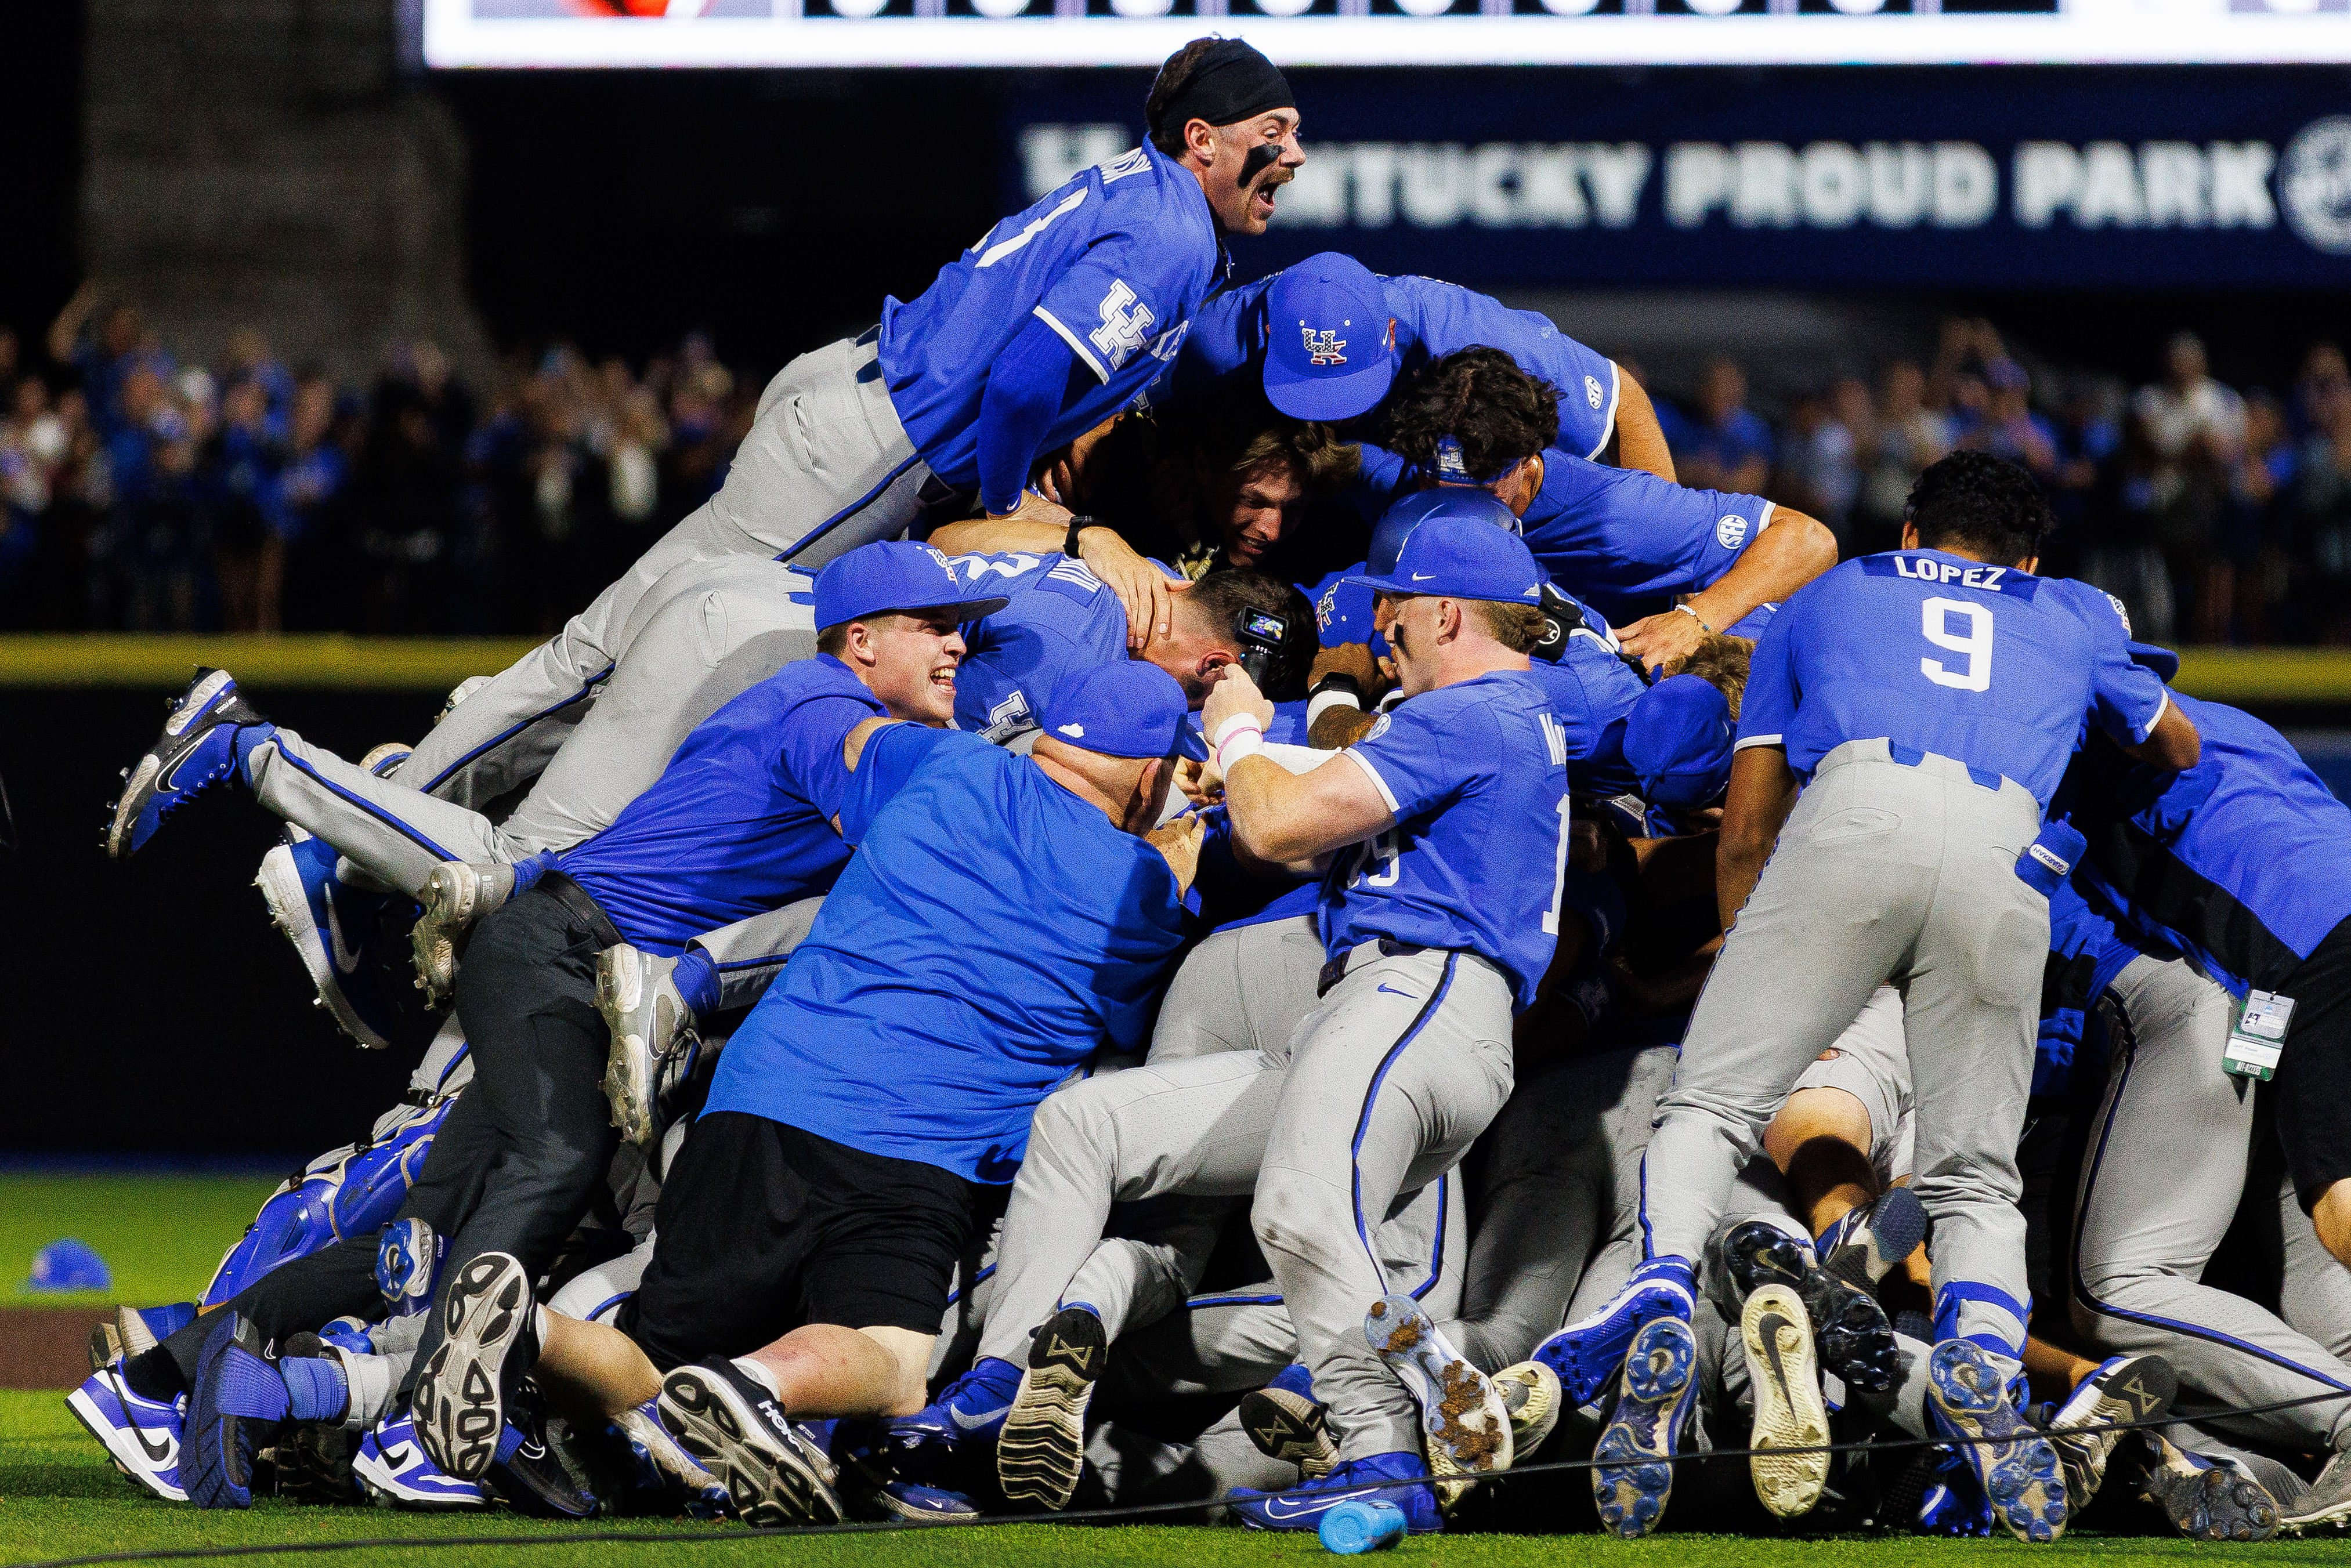 The Kentucky Wildcats have advanced to the College World Series.